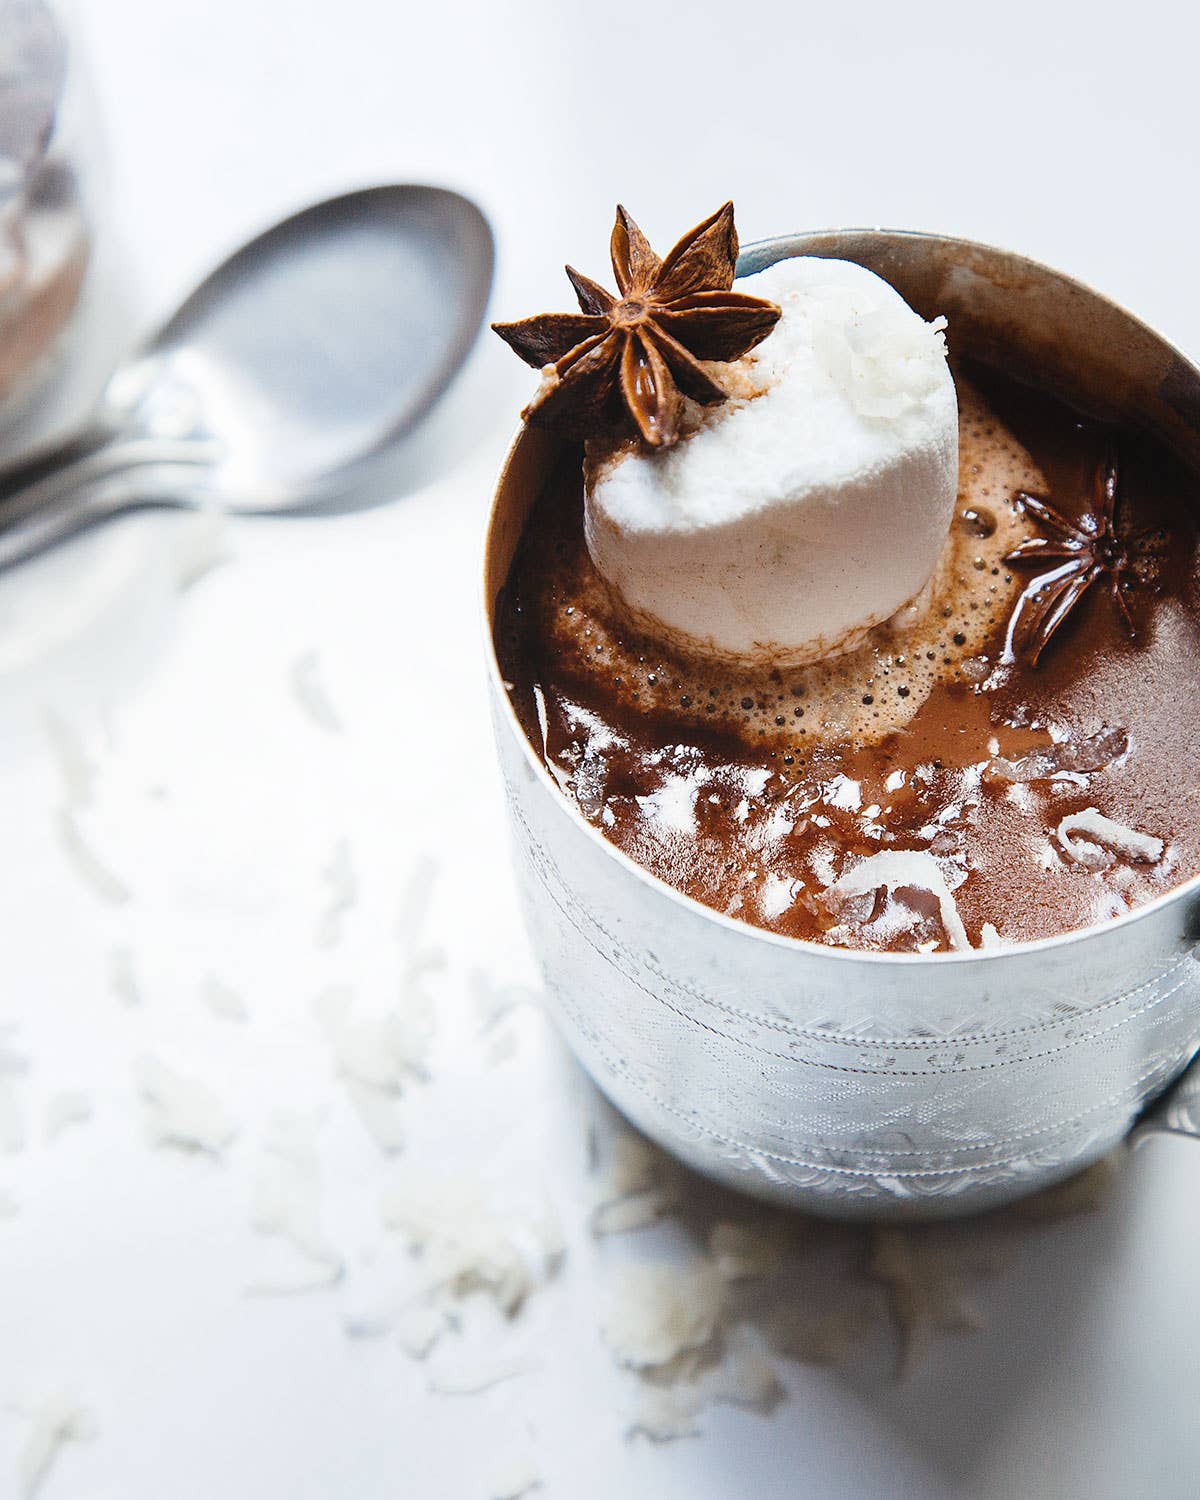 Our 13 Best Hot Chocolate Recipes To Cozy Up With on a Cold Night